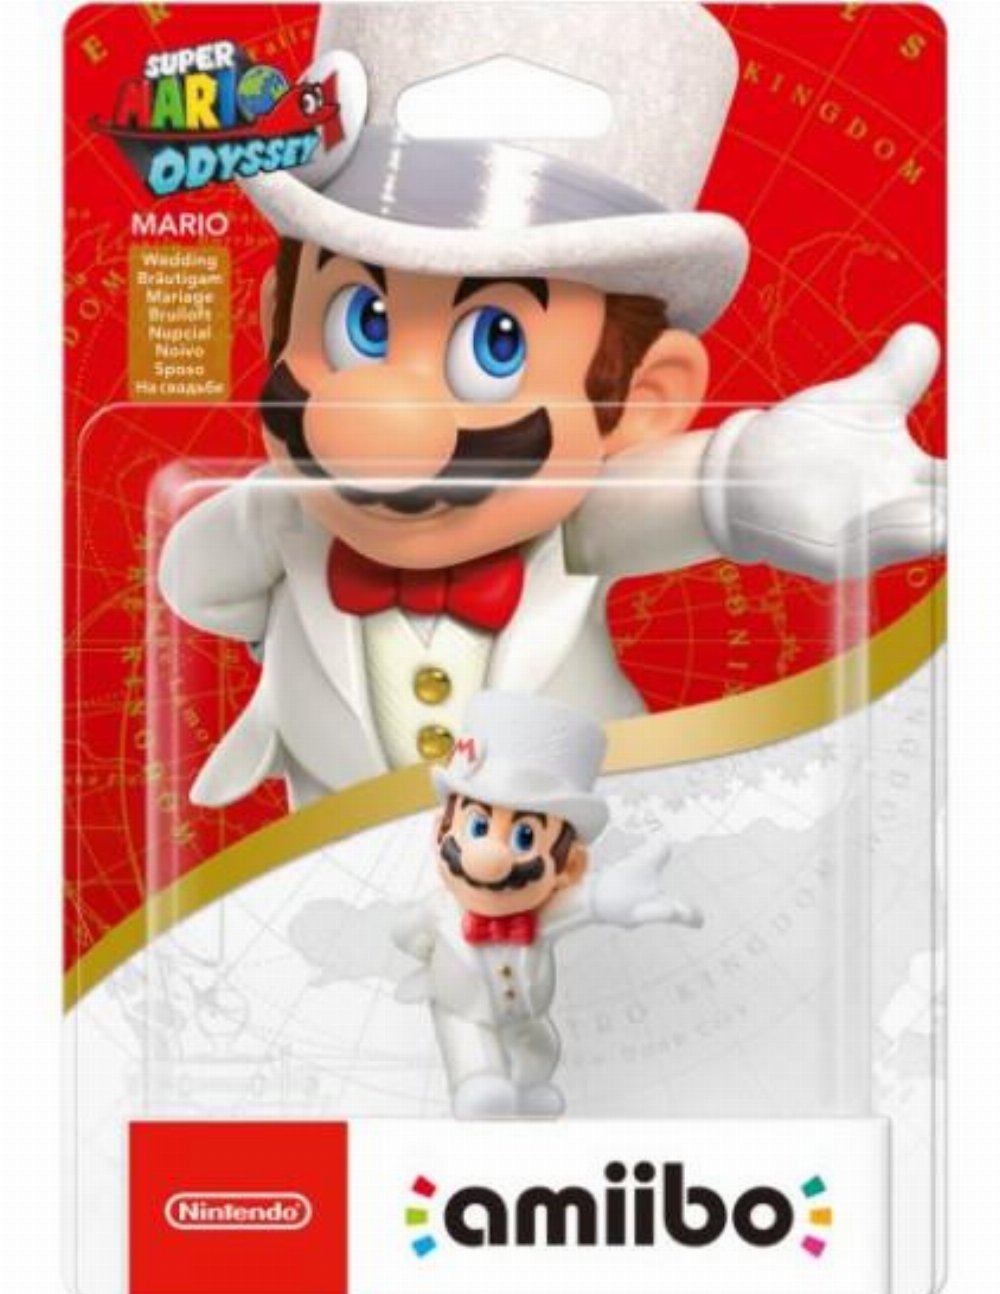 Super Mario Odyssey The Chase 1000 Piece Jigsaw Puzzle, Super Mario  Odyssey Video Game Collectible Puzzle